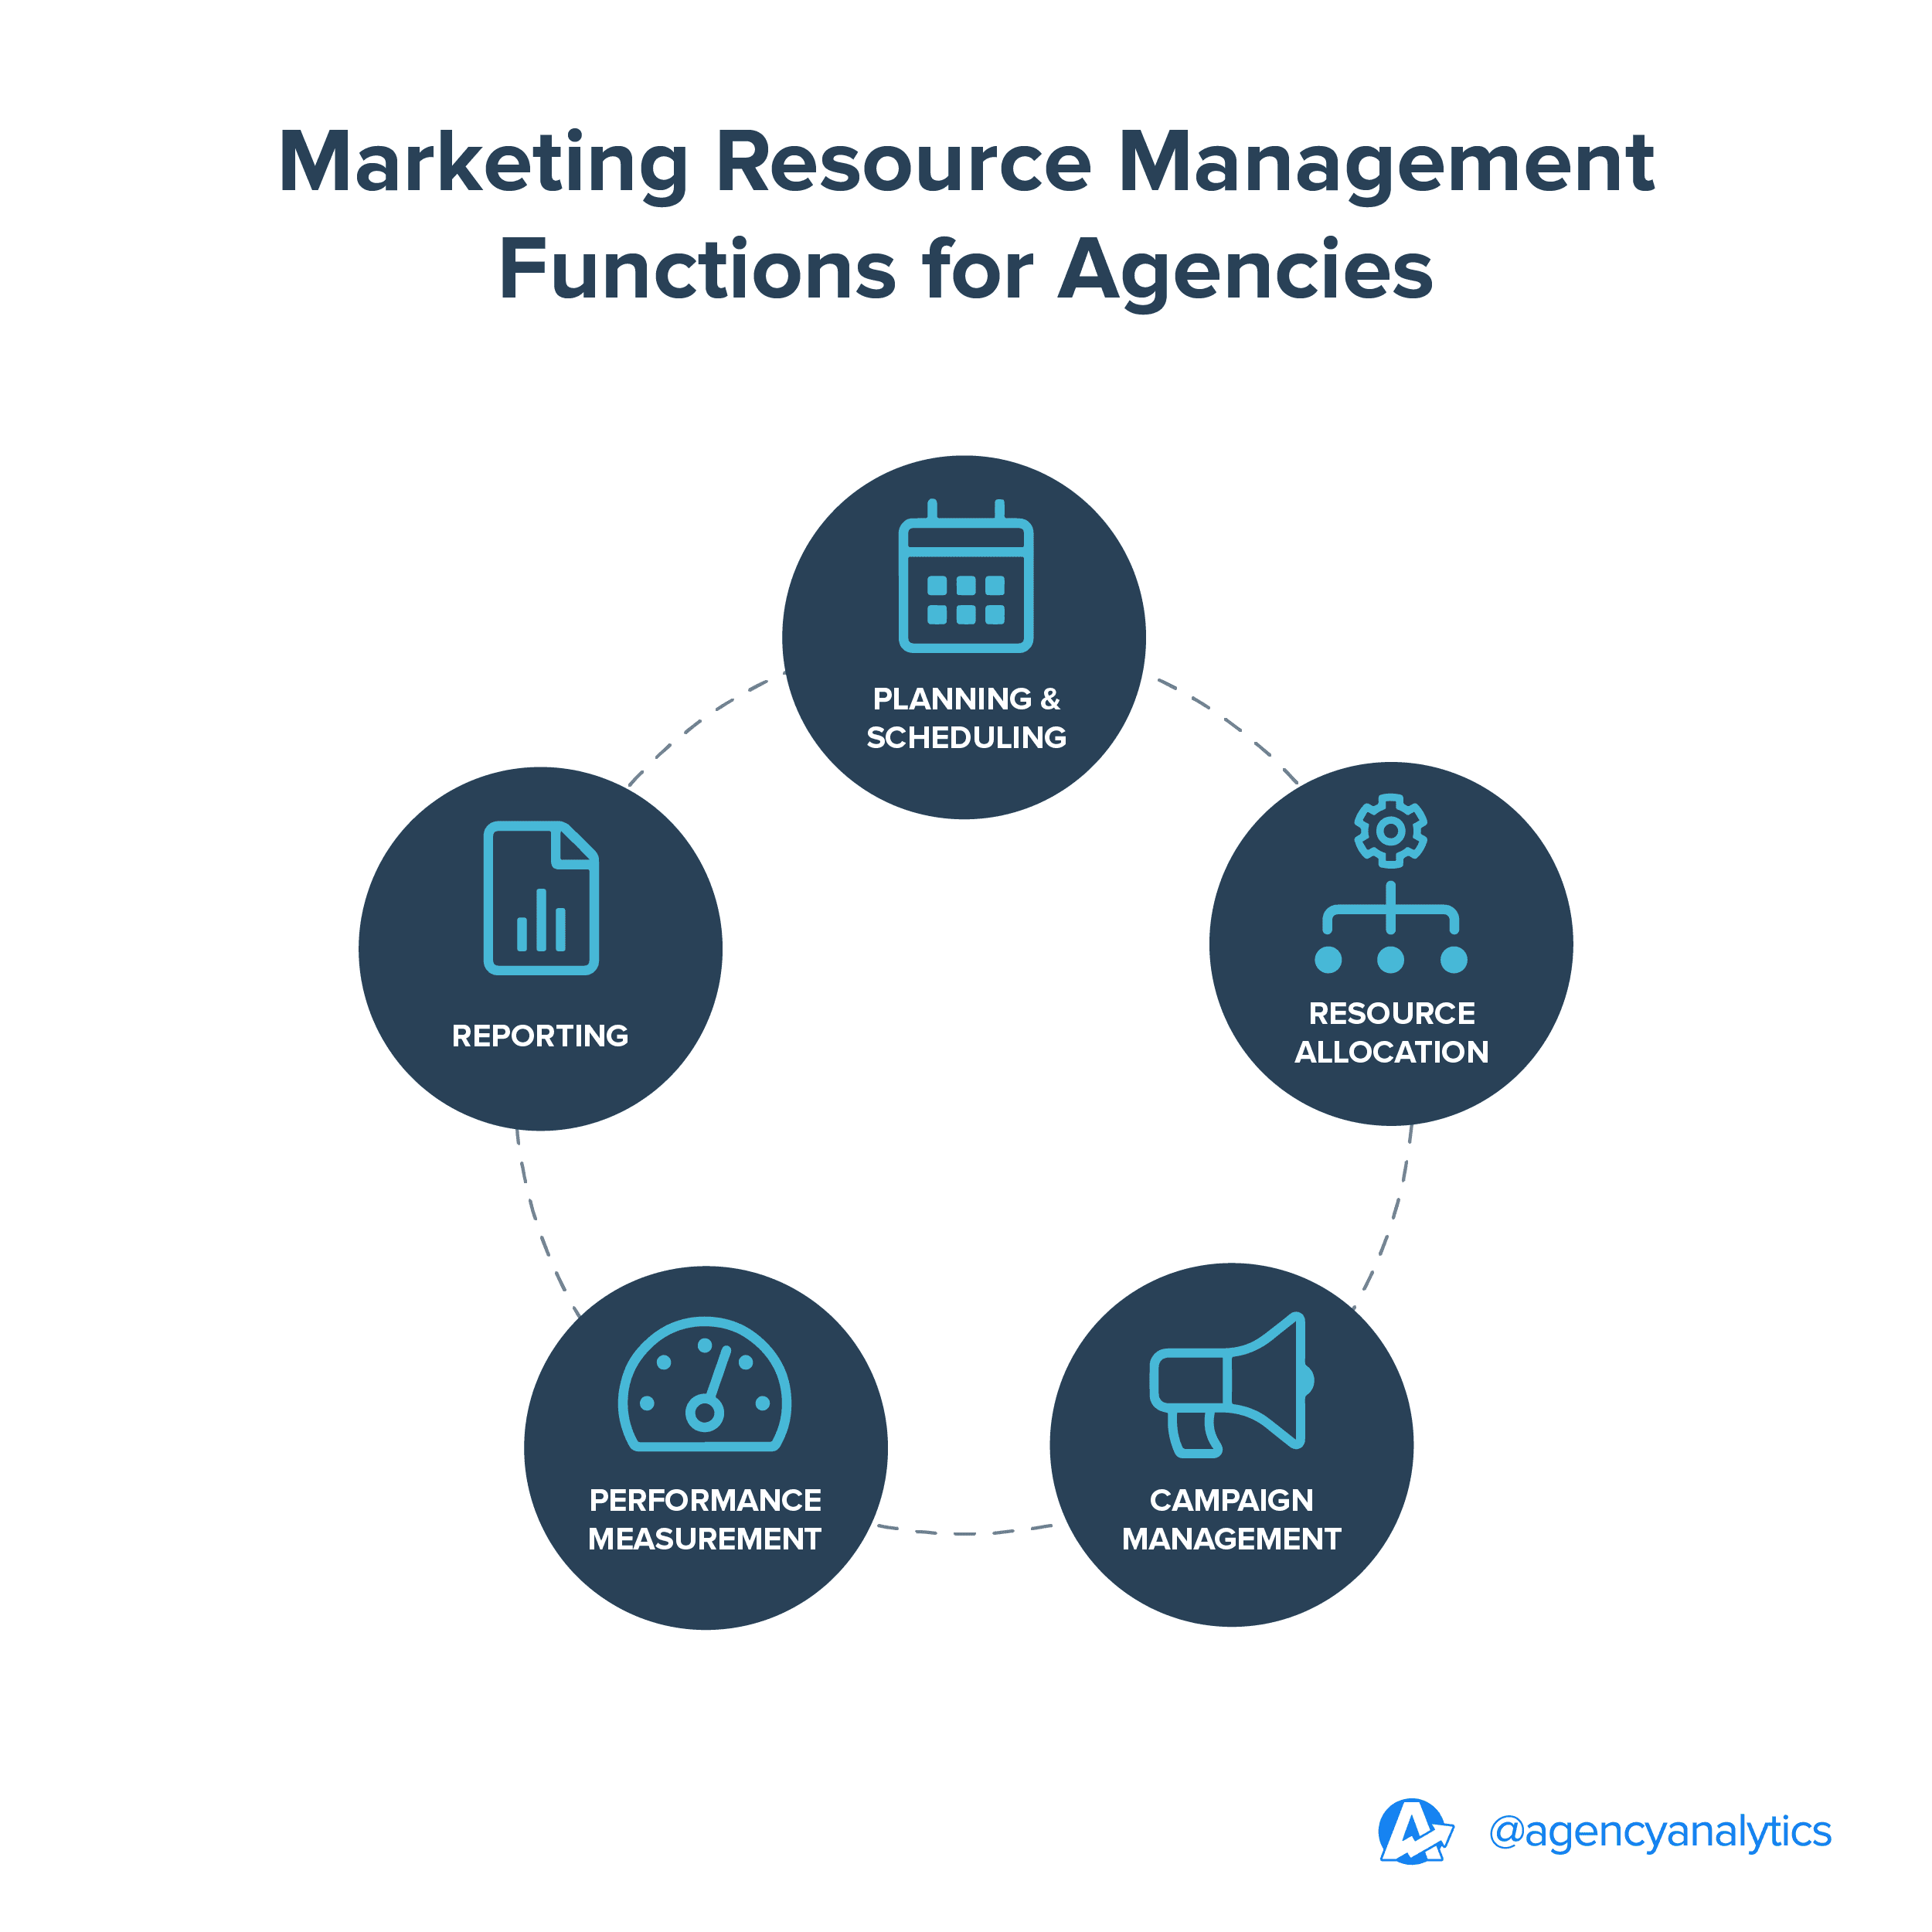 An Illustration of Marketing Resource Management Functions